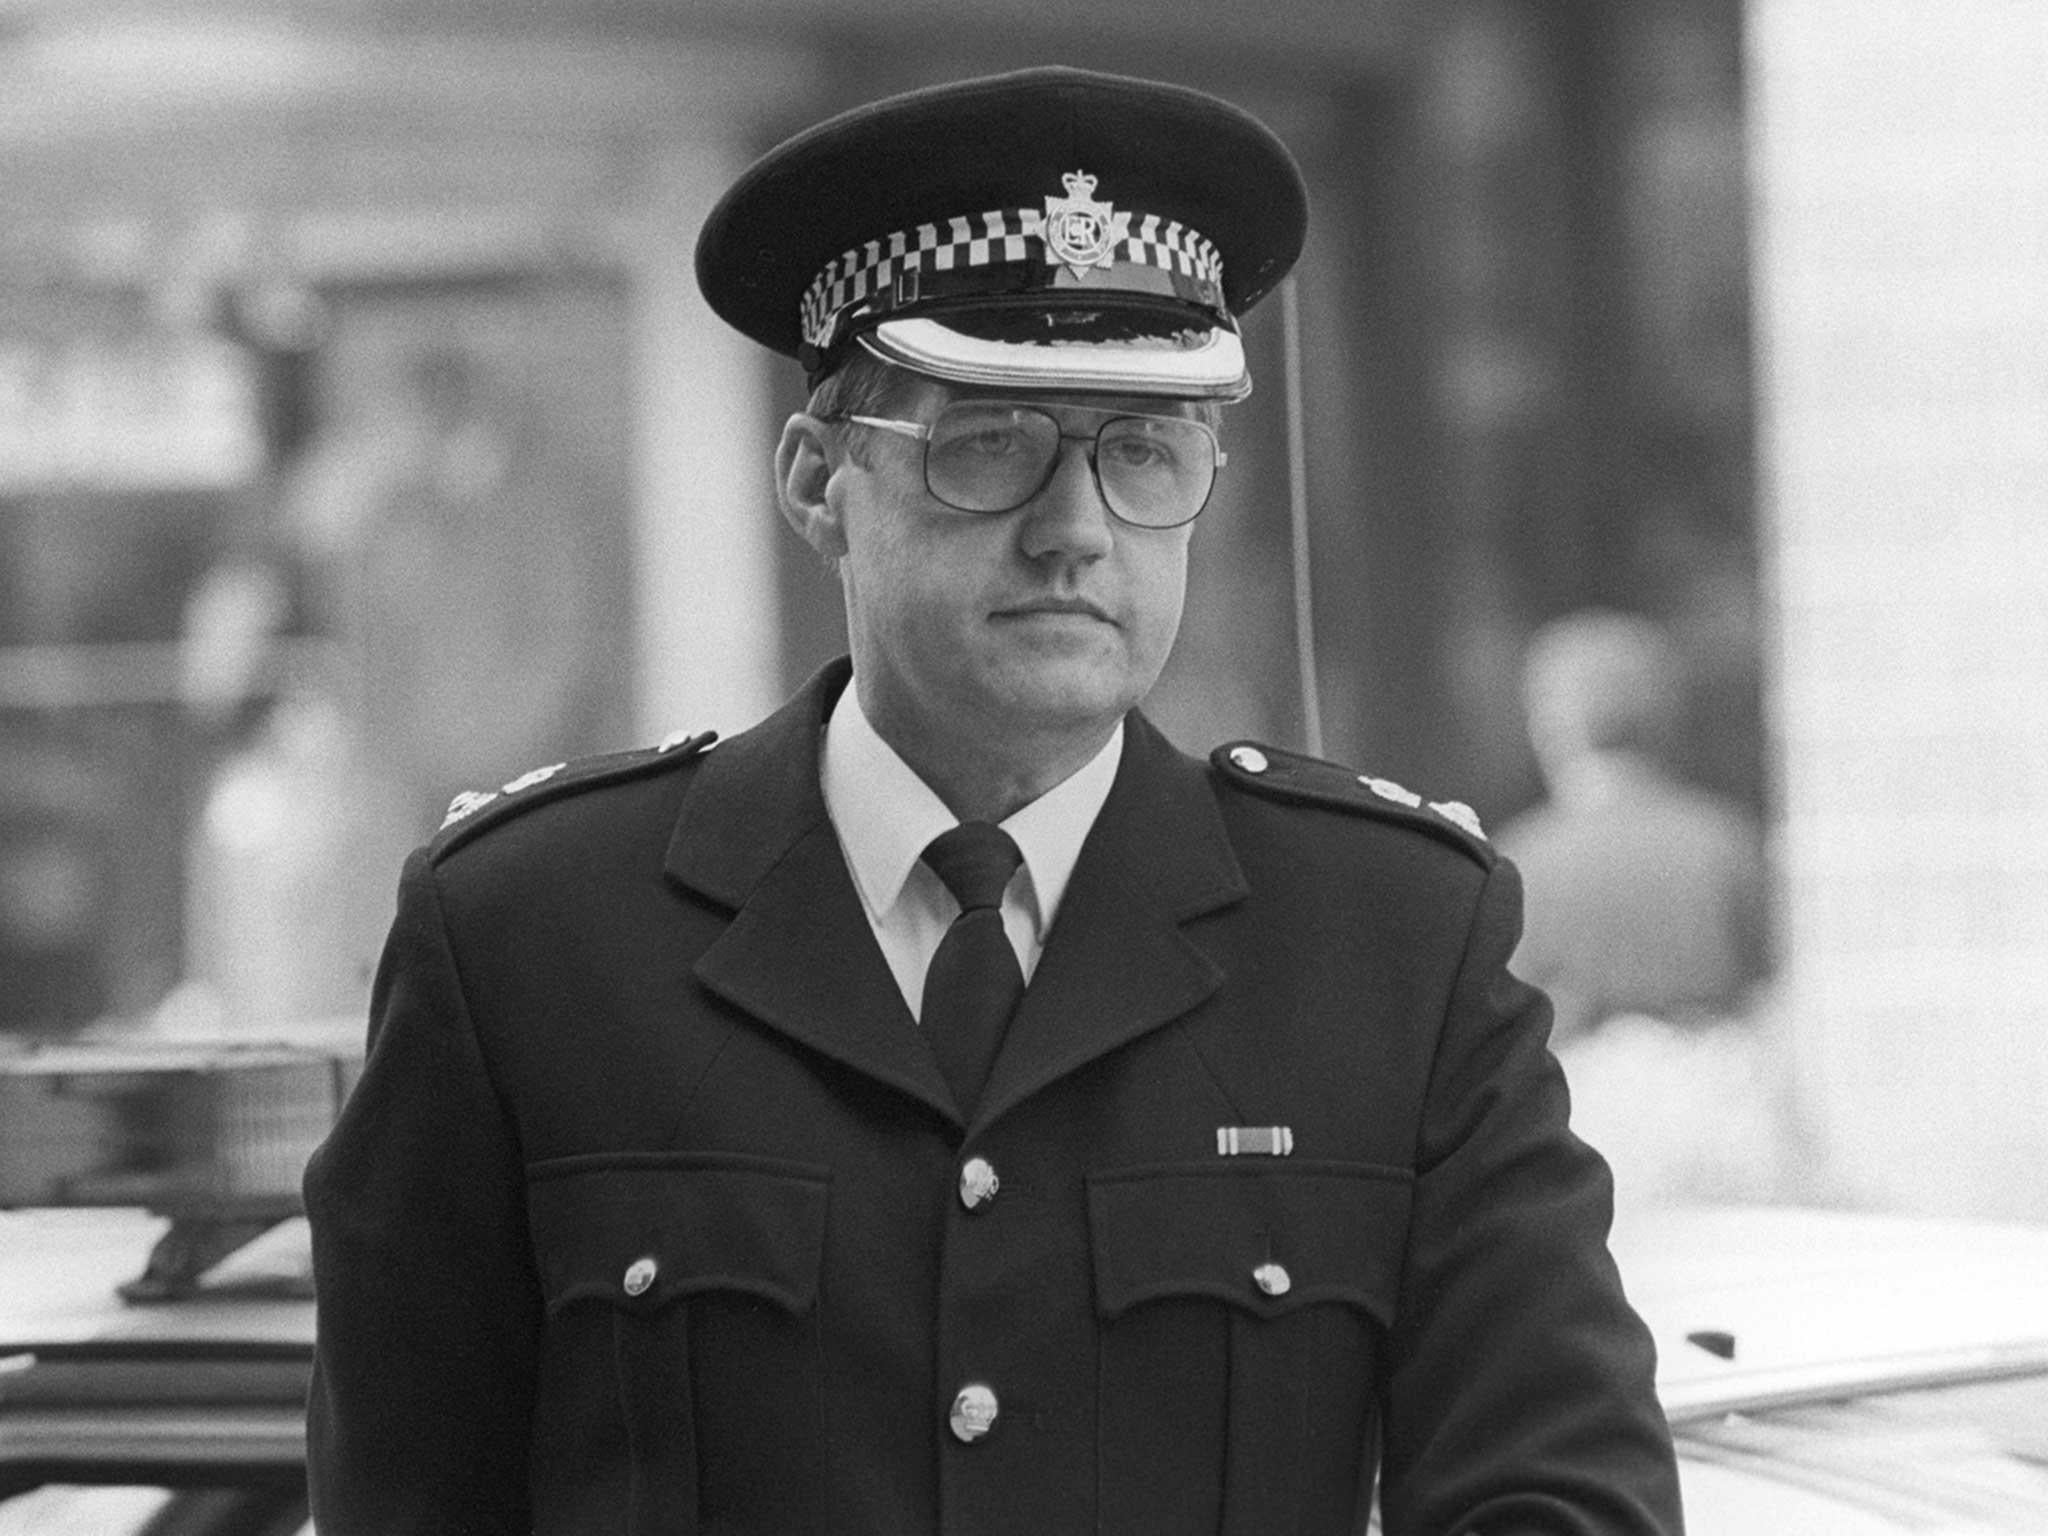 After rising to become chief superintendent, one of Duckenfield’s first major tasks was to lead policing at Hillsborough